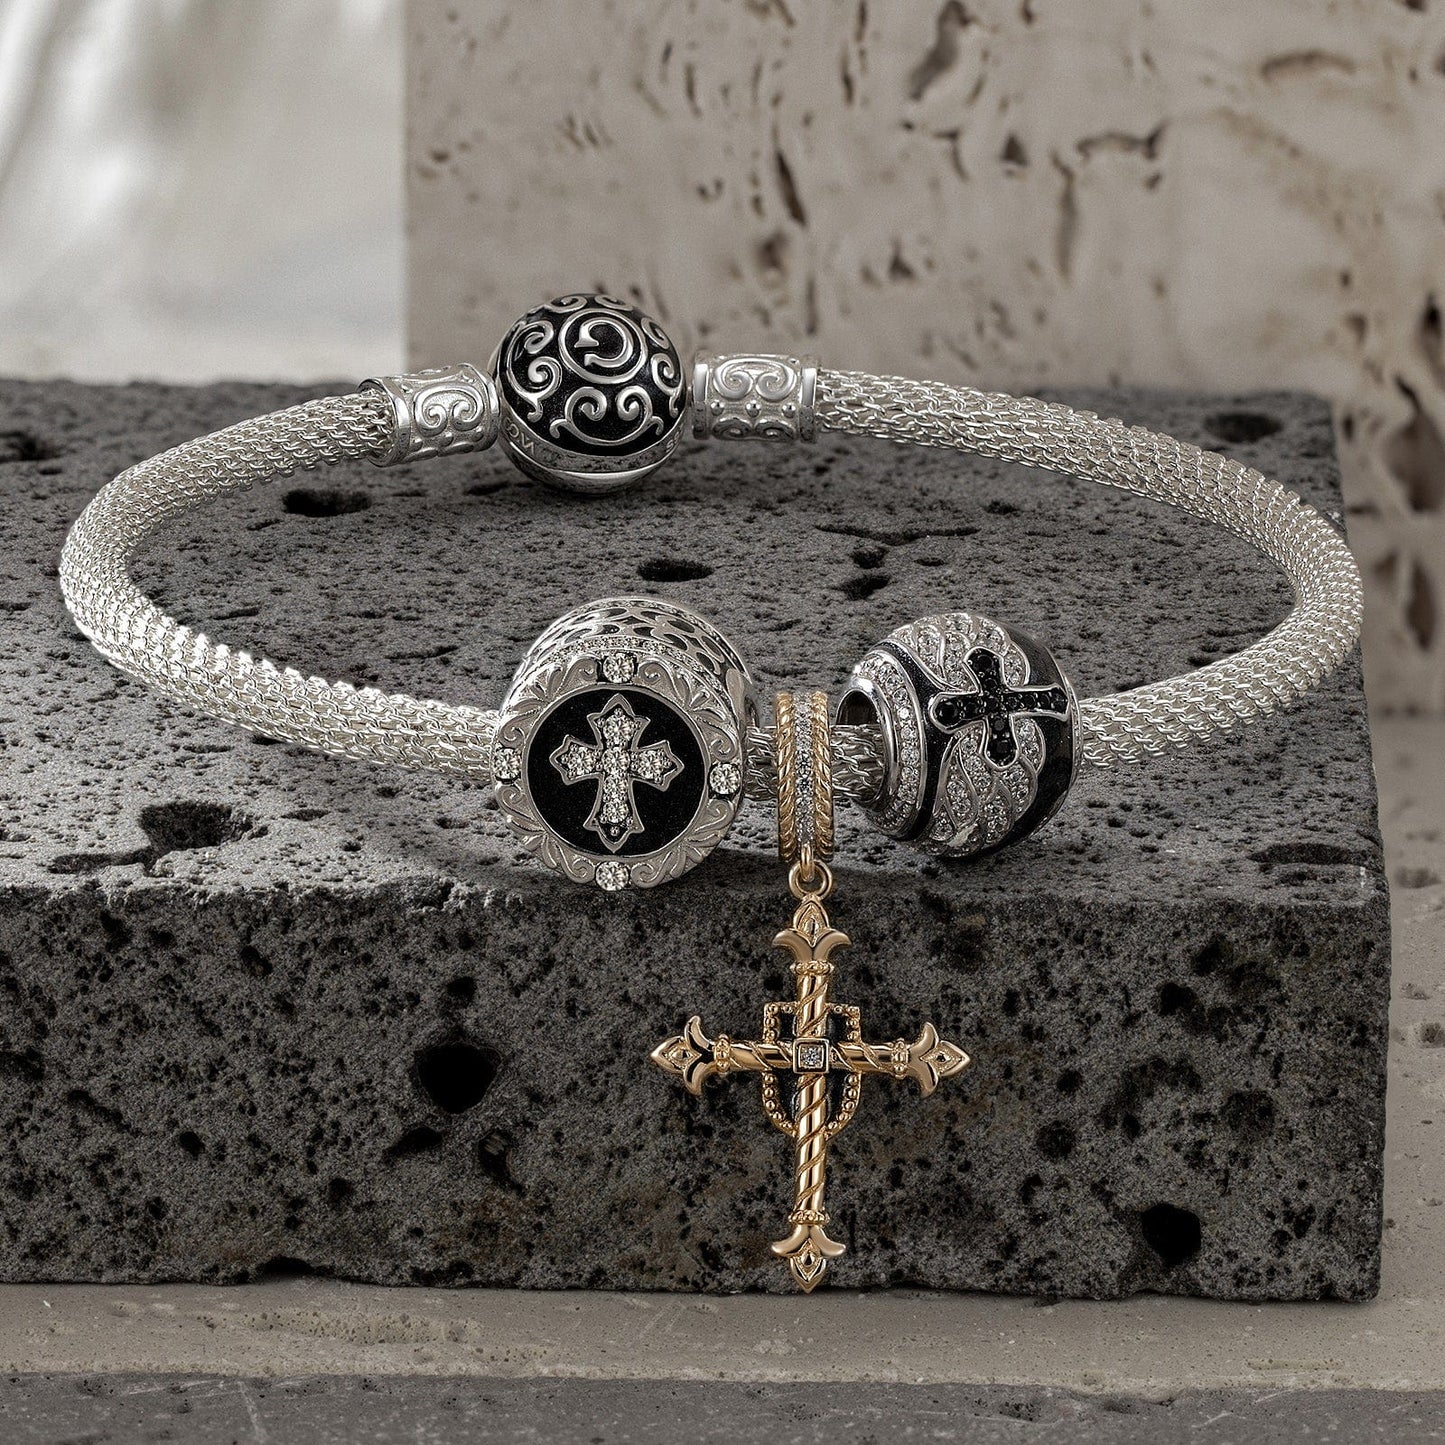 Sterling Silver XL Size The Eyes of God Charms Bracelet Set With Enamel In White Gold Plated For Men